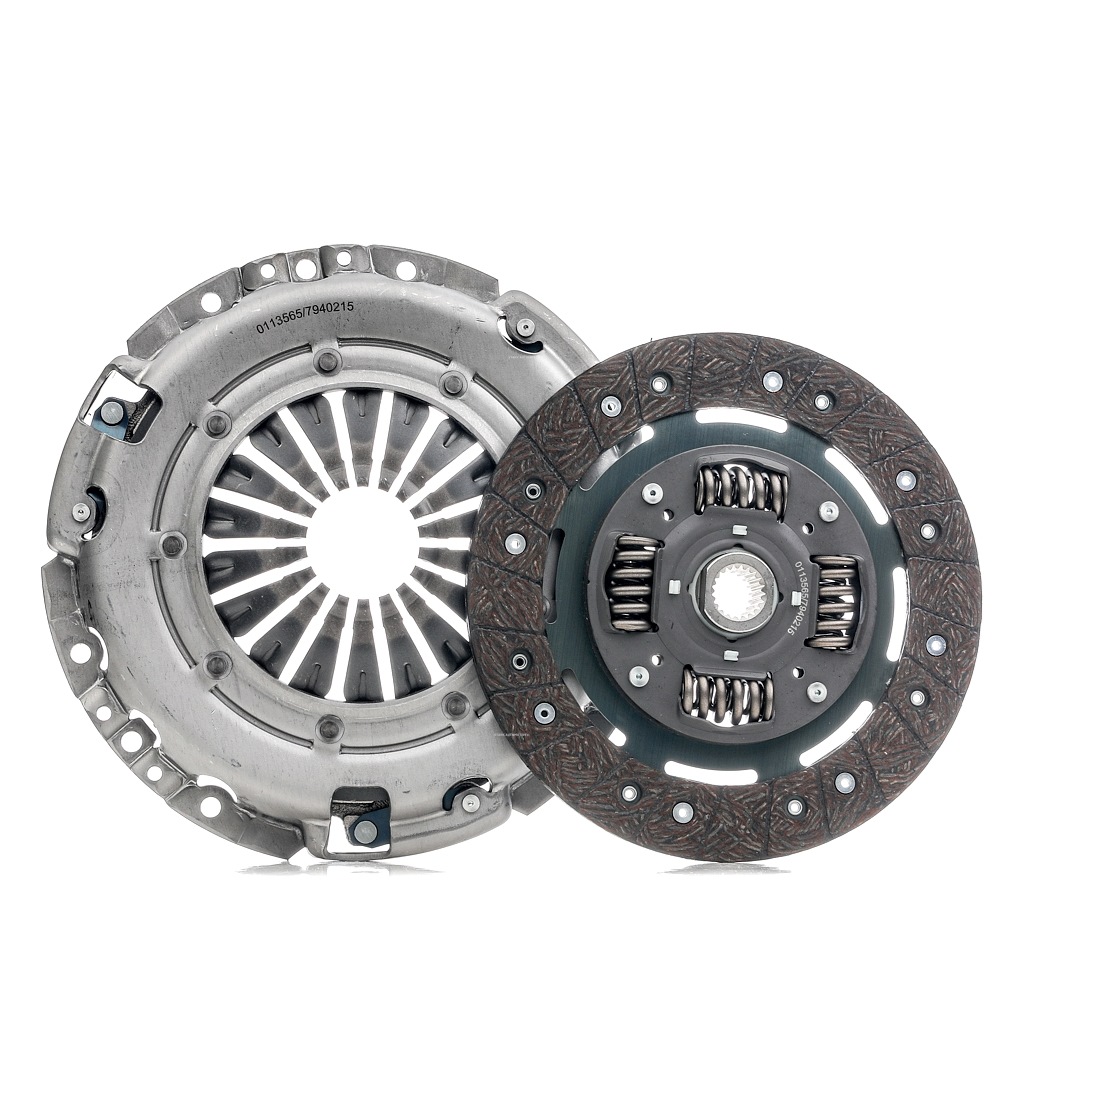 STARK SKCK-0100059 Clutch kit two-piece, with clutch pressure plate, with clutch disc, 242mm